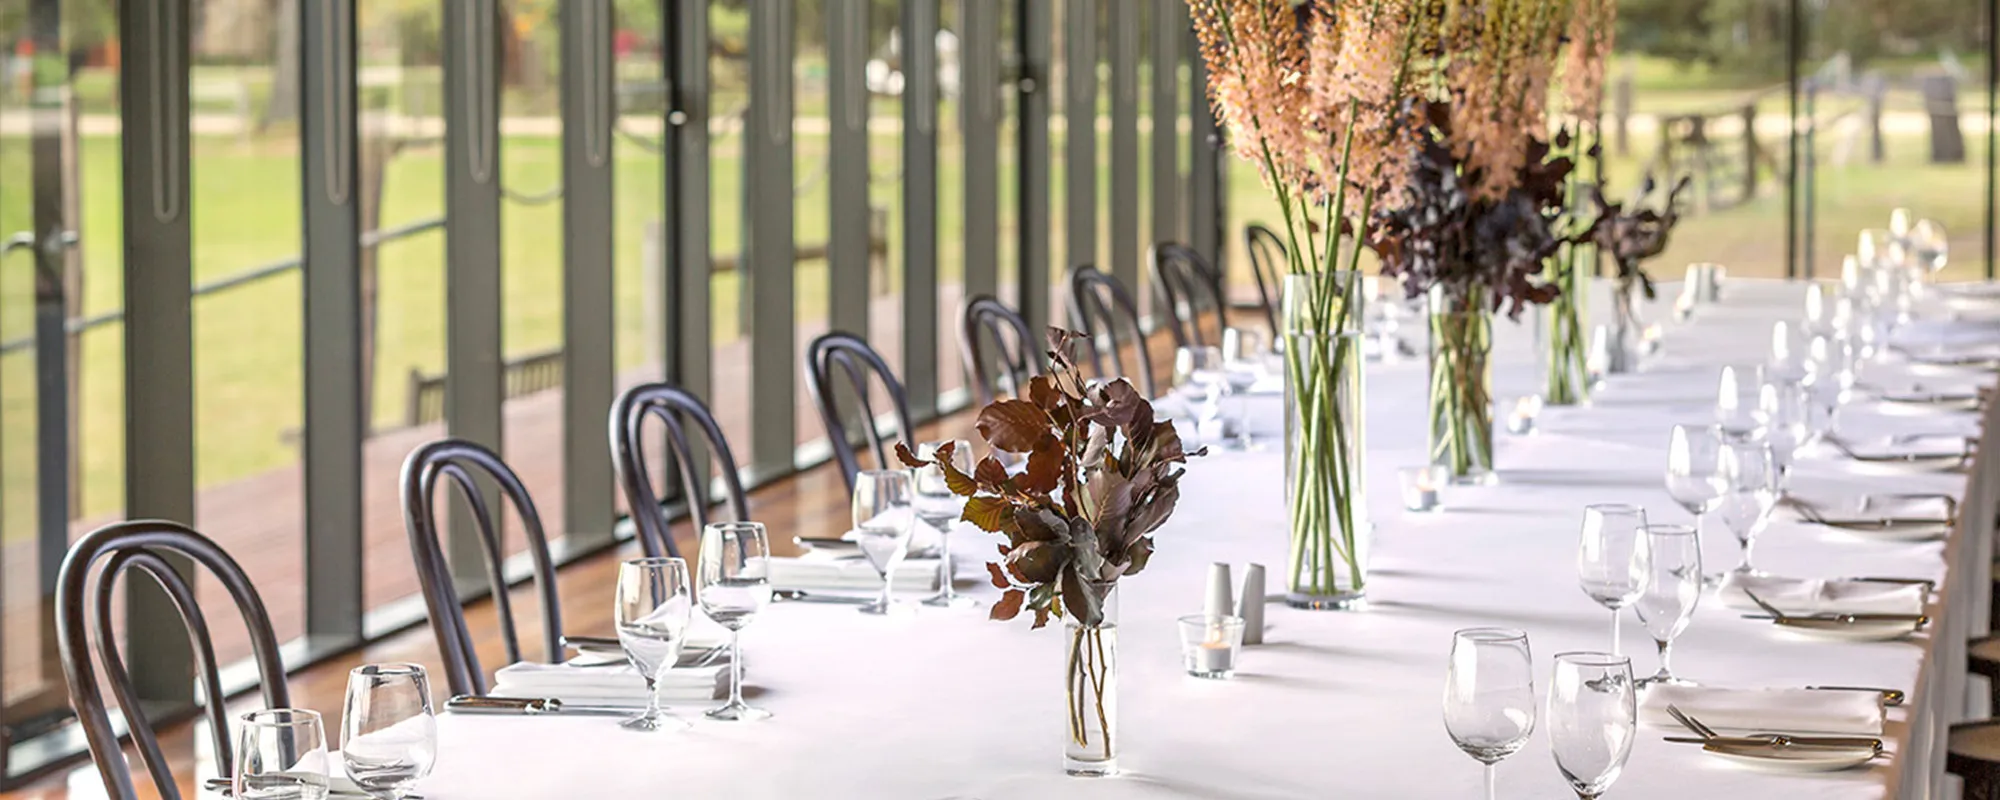 Lancemore Mansion Hotel Werribee Park Conference Venue Regional Event and wedding pavilion 2000x800 2